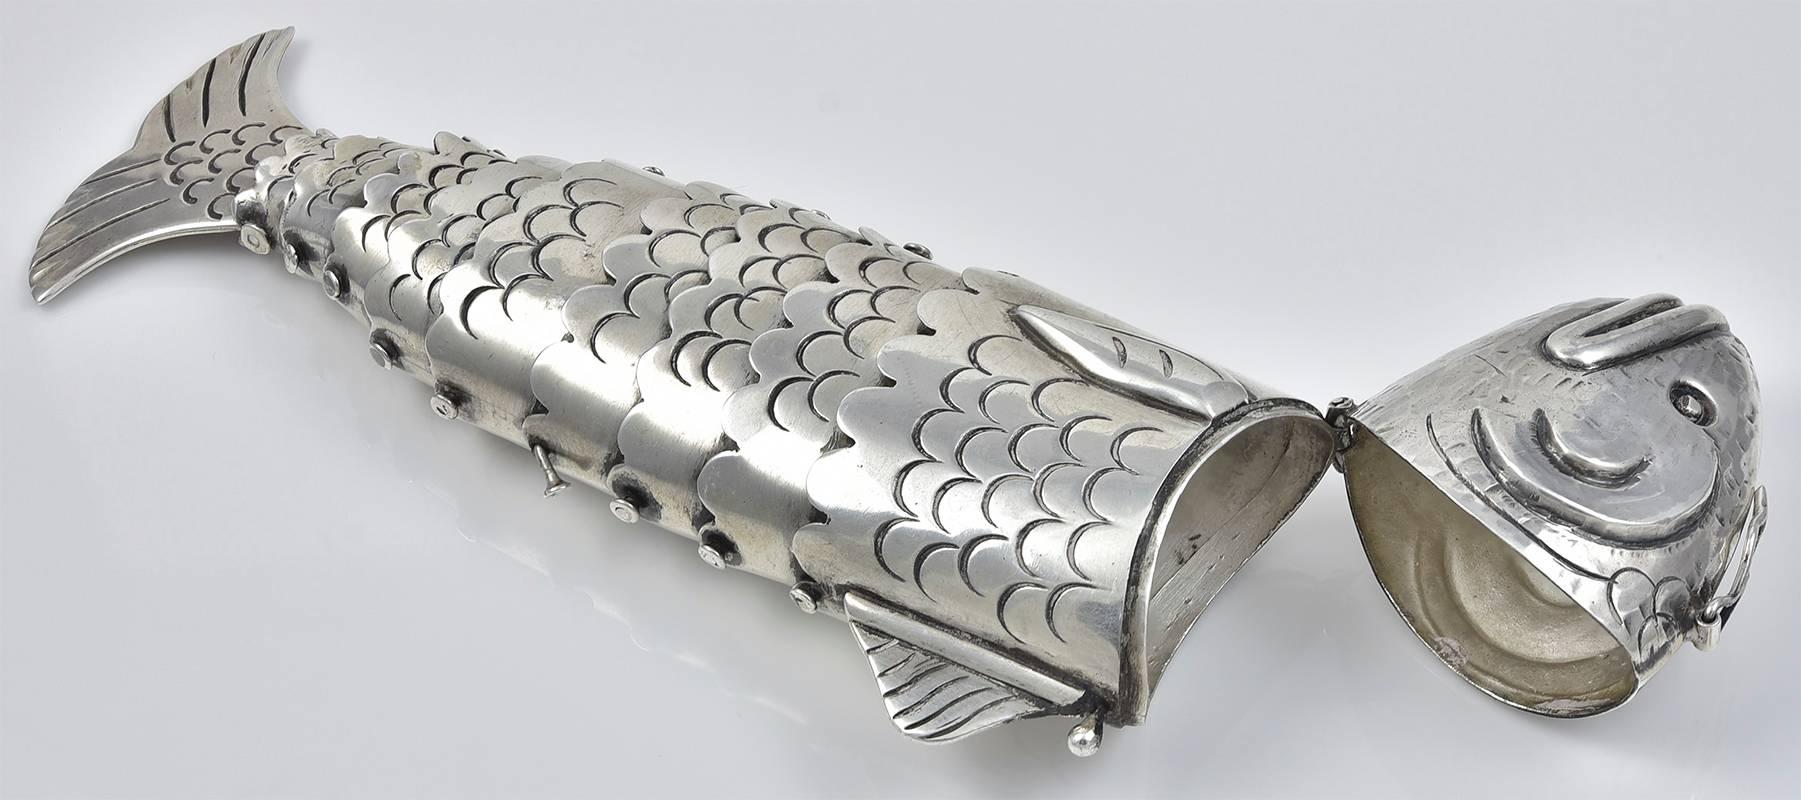 Beautiful sterling silver articulated fish box.   Made and signed by William Spratling. A fine example of his Mexican Modern design. 6-1/2